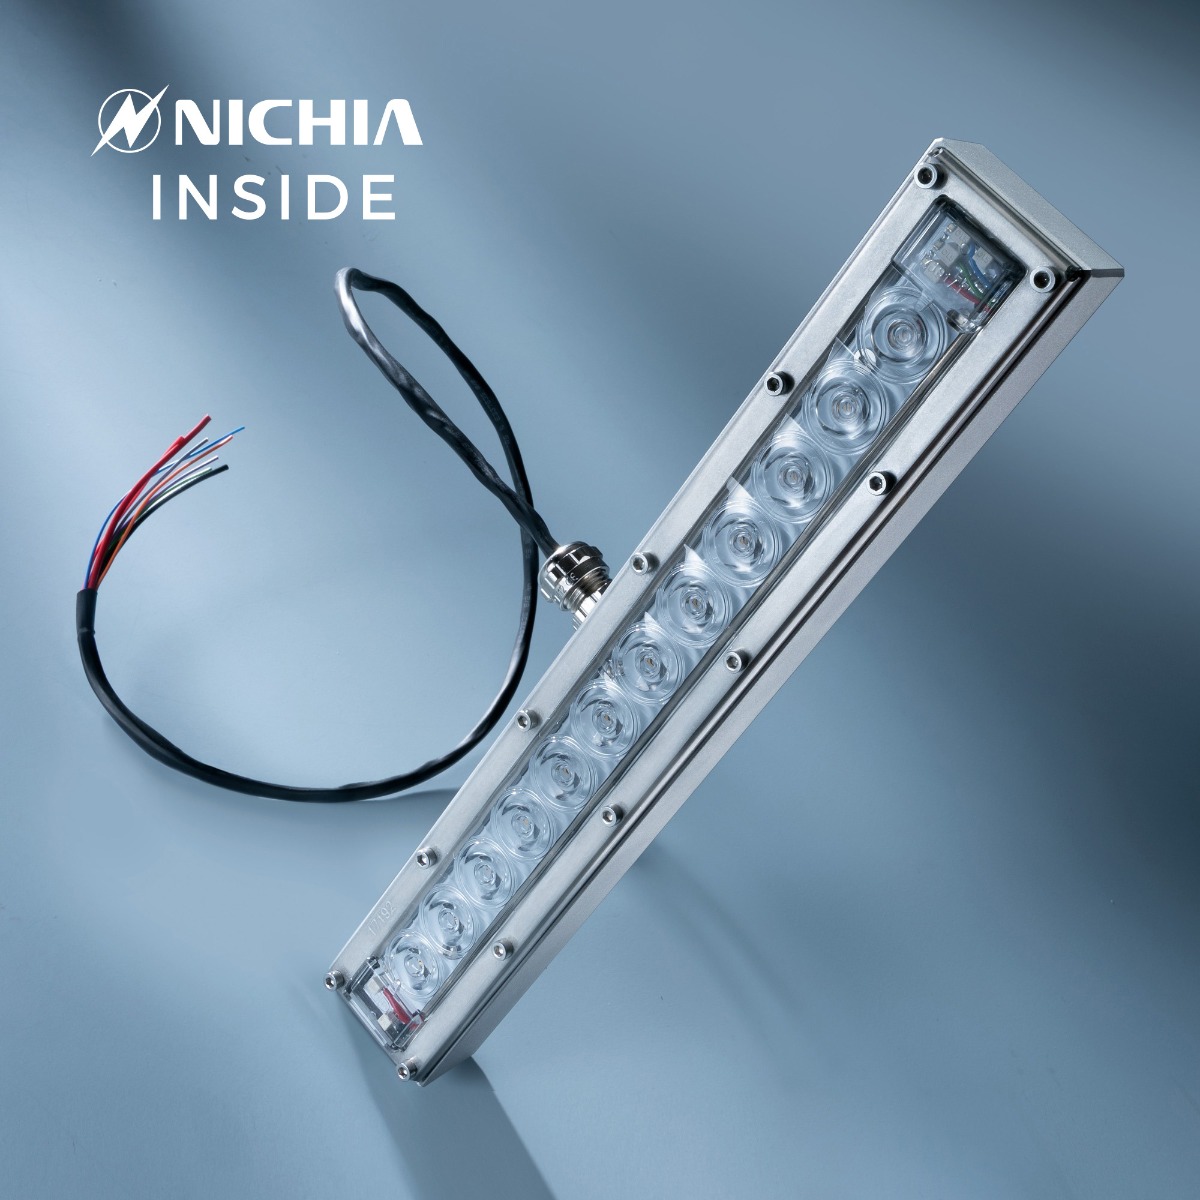 Violet UVC Nichia LED Module 280nm 12 LEDs NCSU334B 630mW 29cm 48VDC IP67 with controler incl., for disinfection and sterilisation 